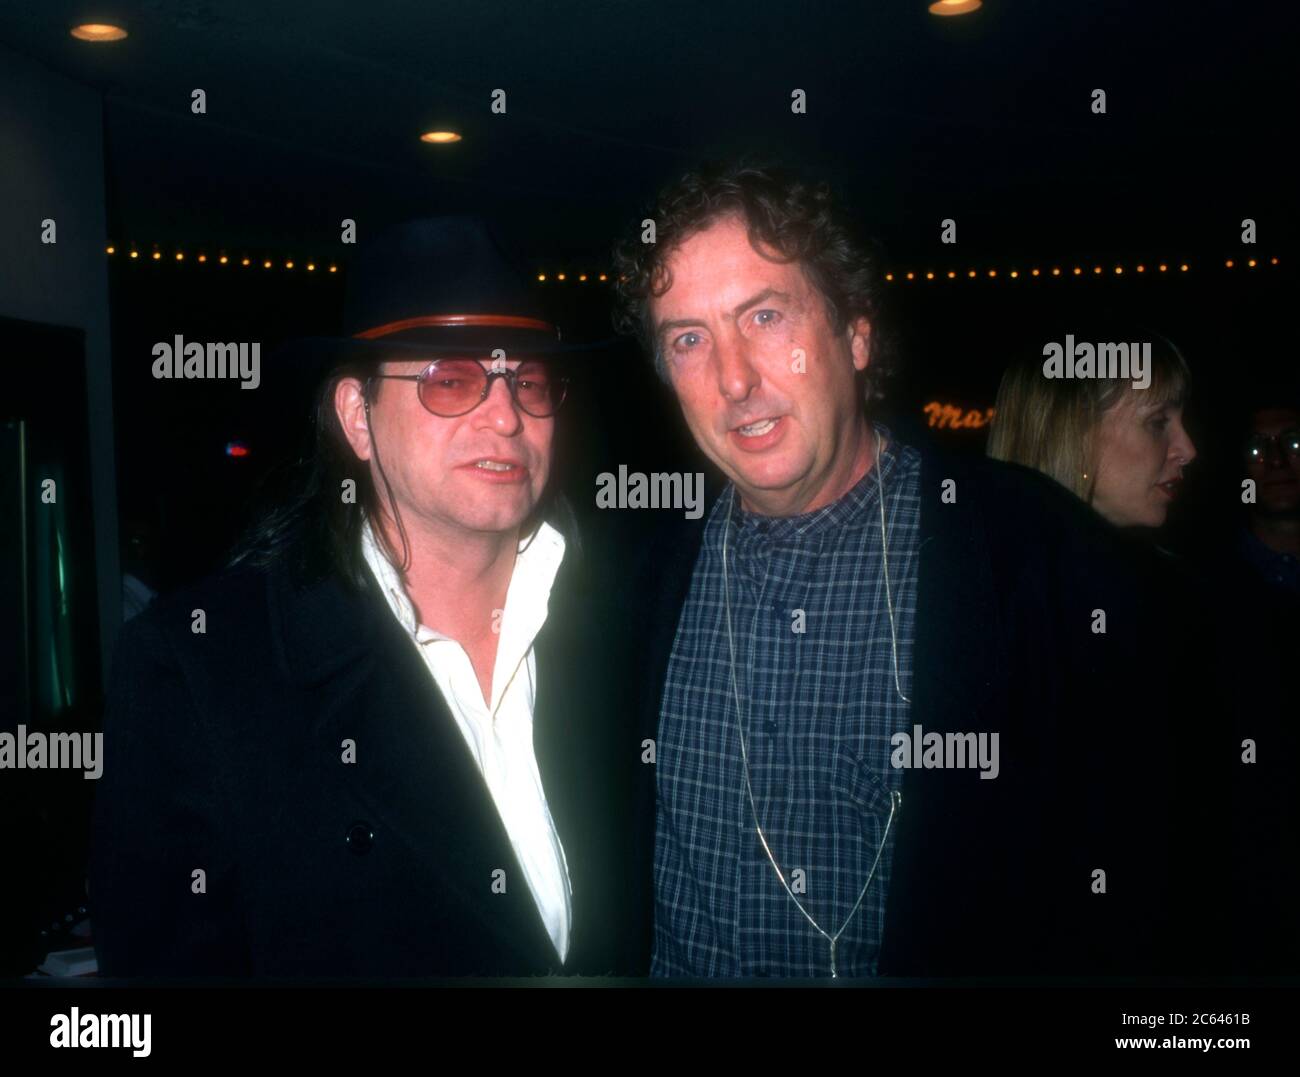 Westwood, California, USA 13th December 1995 Director Terry Gilliam and actor Eric Idle attend Universal Pictures' '12 Monkeys' Premiere on December 13, 1995 at Mann Bruin Theatre in Westwood, California, USA. Photo by Barry King/Alamy Stock Photo Stock Photo